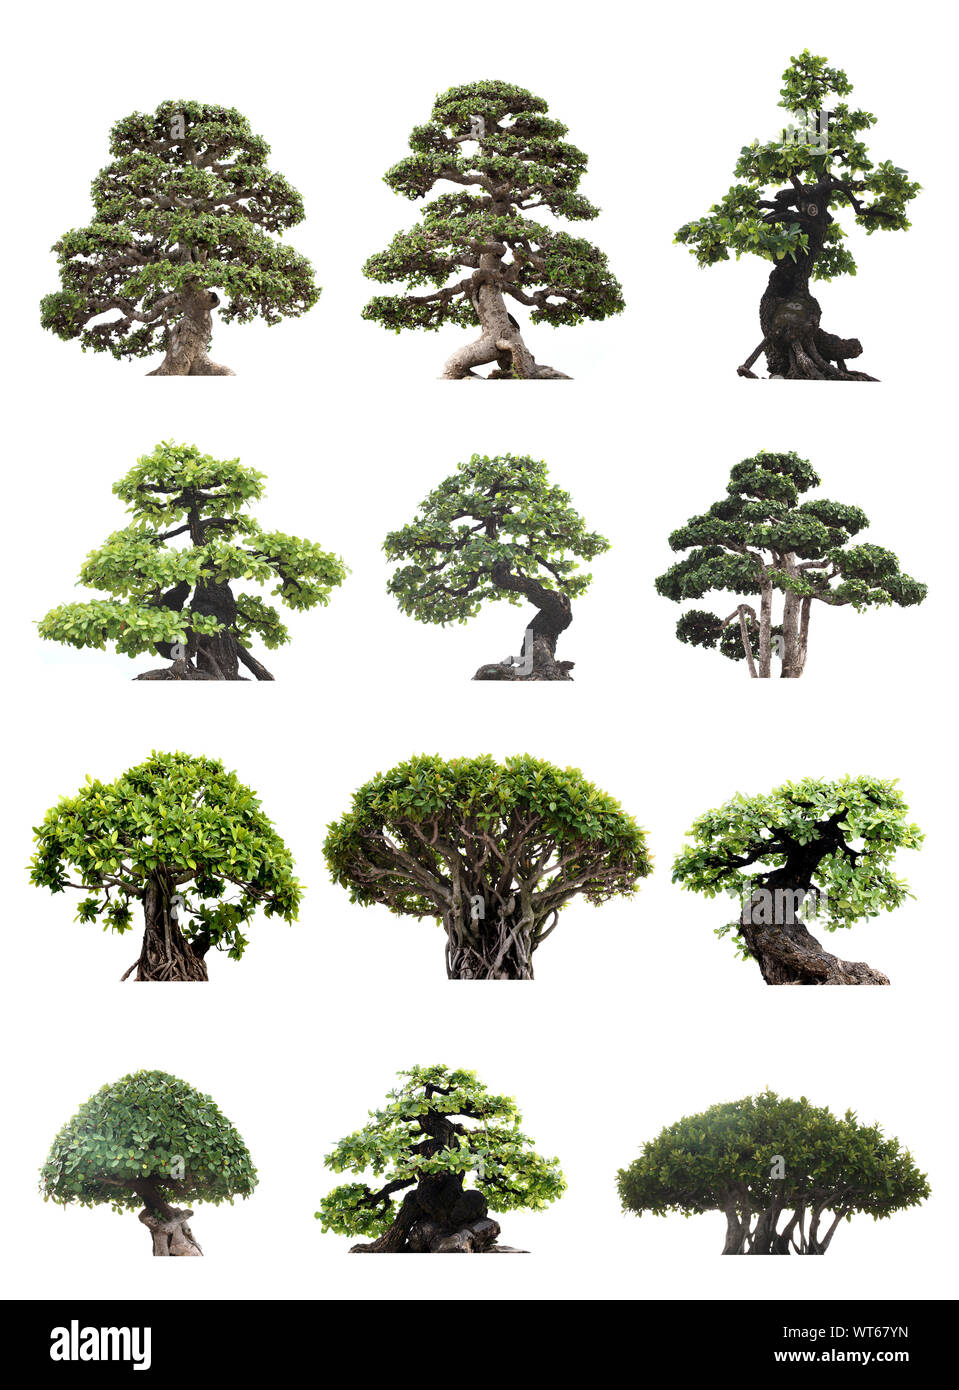 Bonzai Garden High Resolution Stock Photography and Images - Alamy